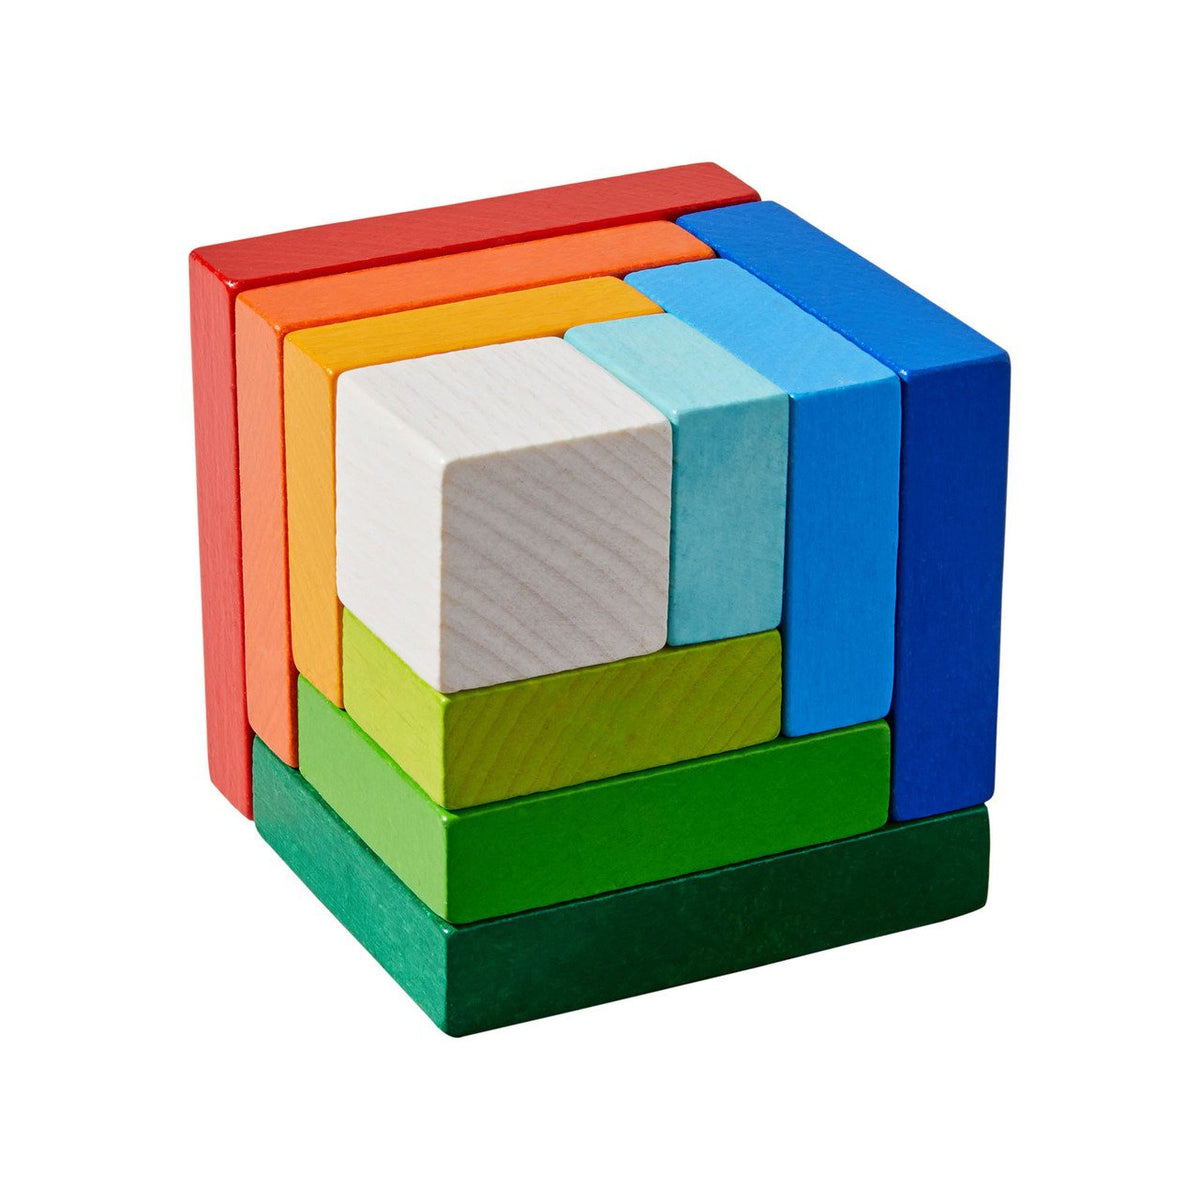 Haba 3D rainbow cube arranging game – Dilly Dally Kids